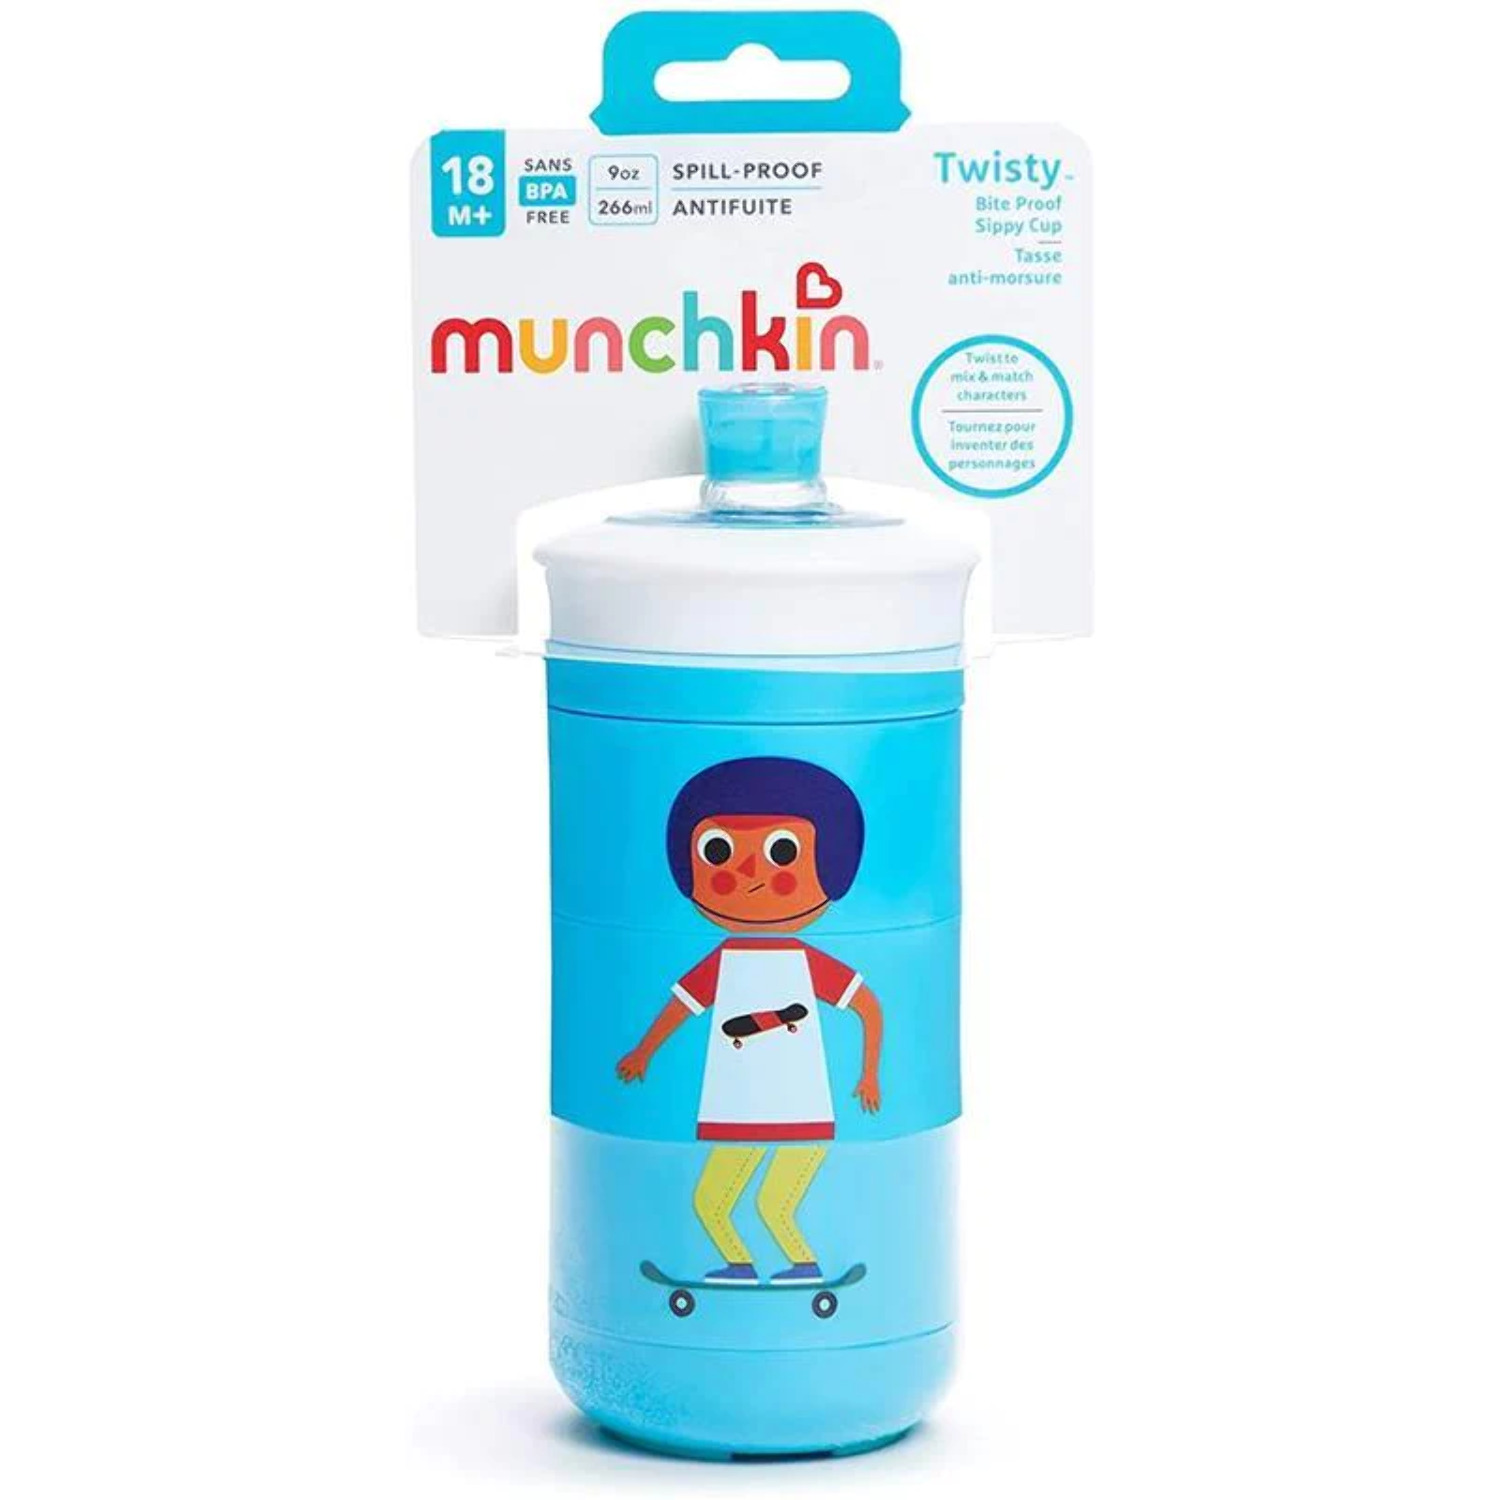 Munchkin - 1 Pk 9 Oz Twisty Bite Proof Sippy Cup, Animals - image 3 of 5